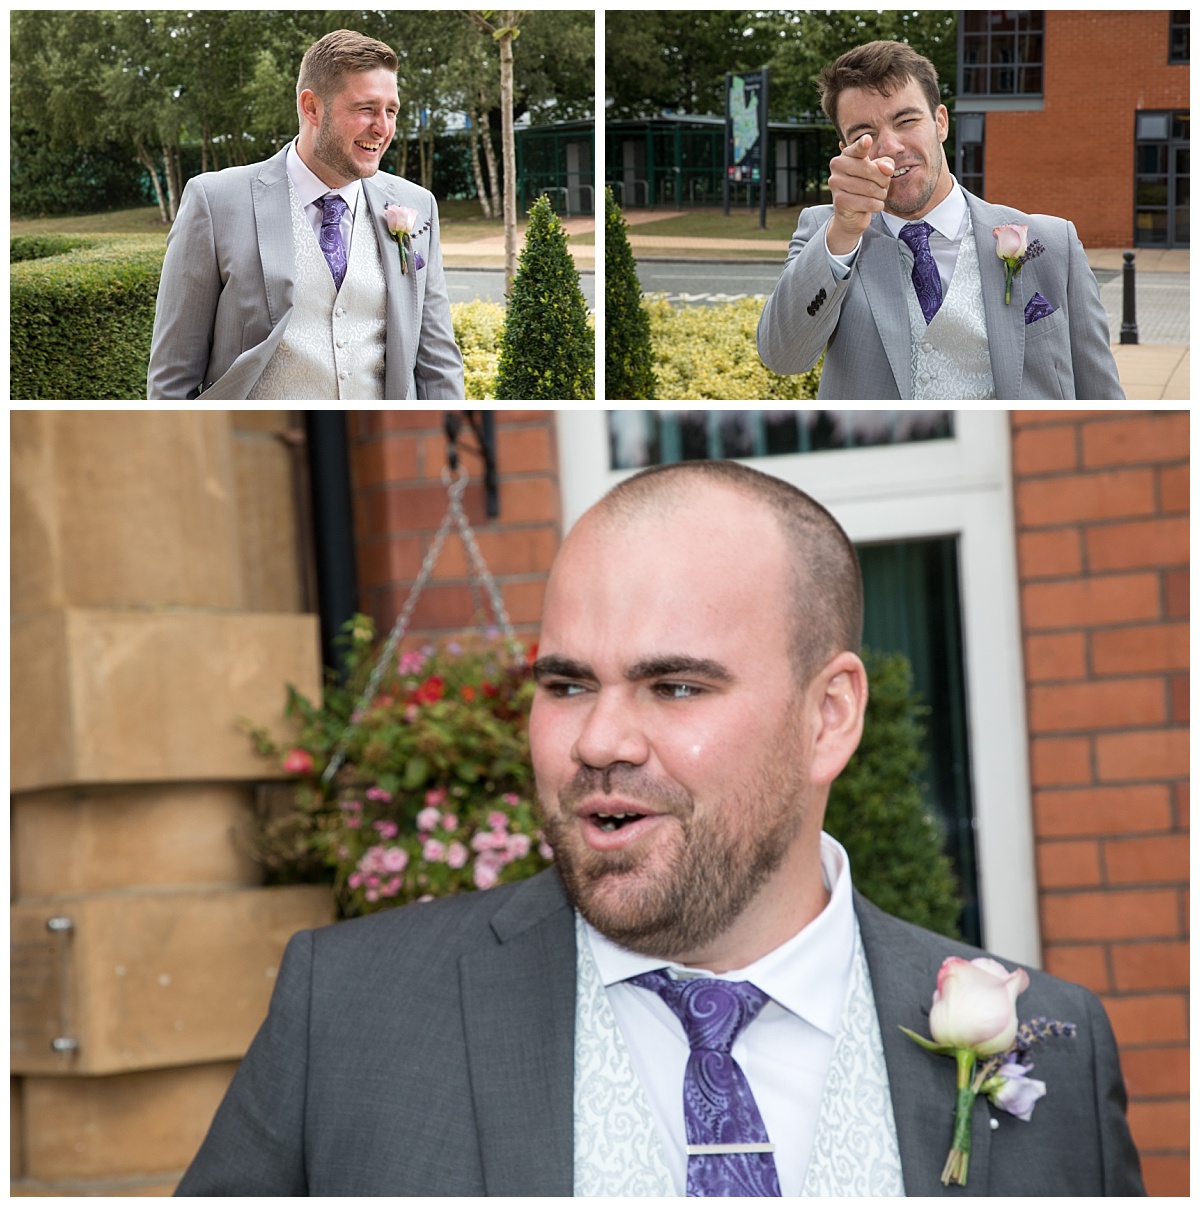 Wedding Photography Manchester - Sam and James's Cheadle House Wedding 26